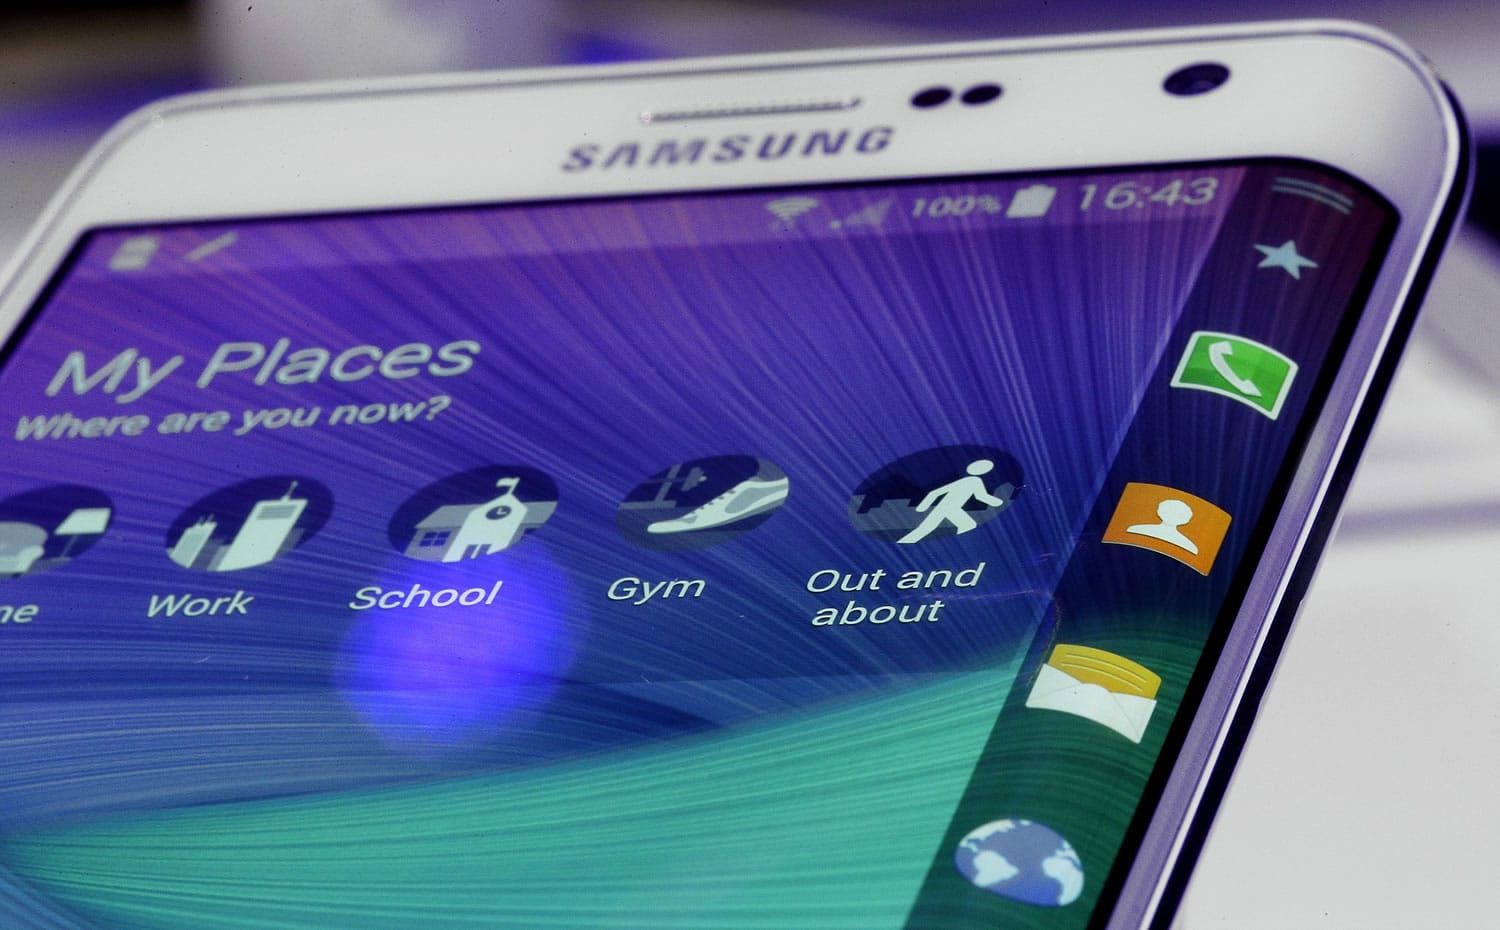 The 5.6-inch Samsung Galaxy Note Edge is a variant of the Galaxy Note 4, the latest iteration of Samsung's large-screen stalwart.